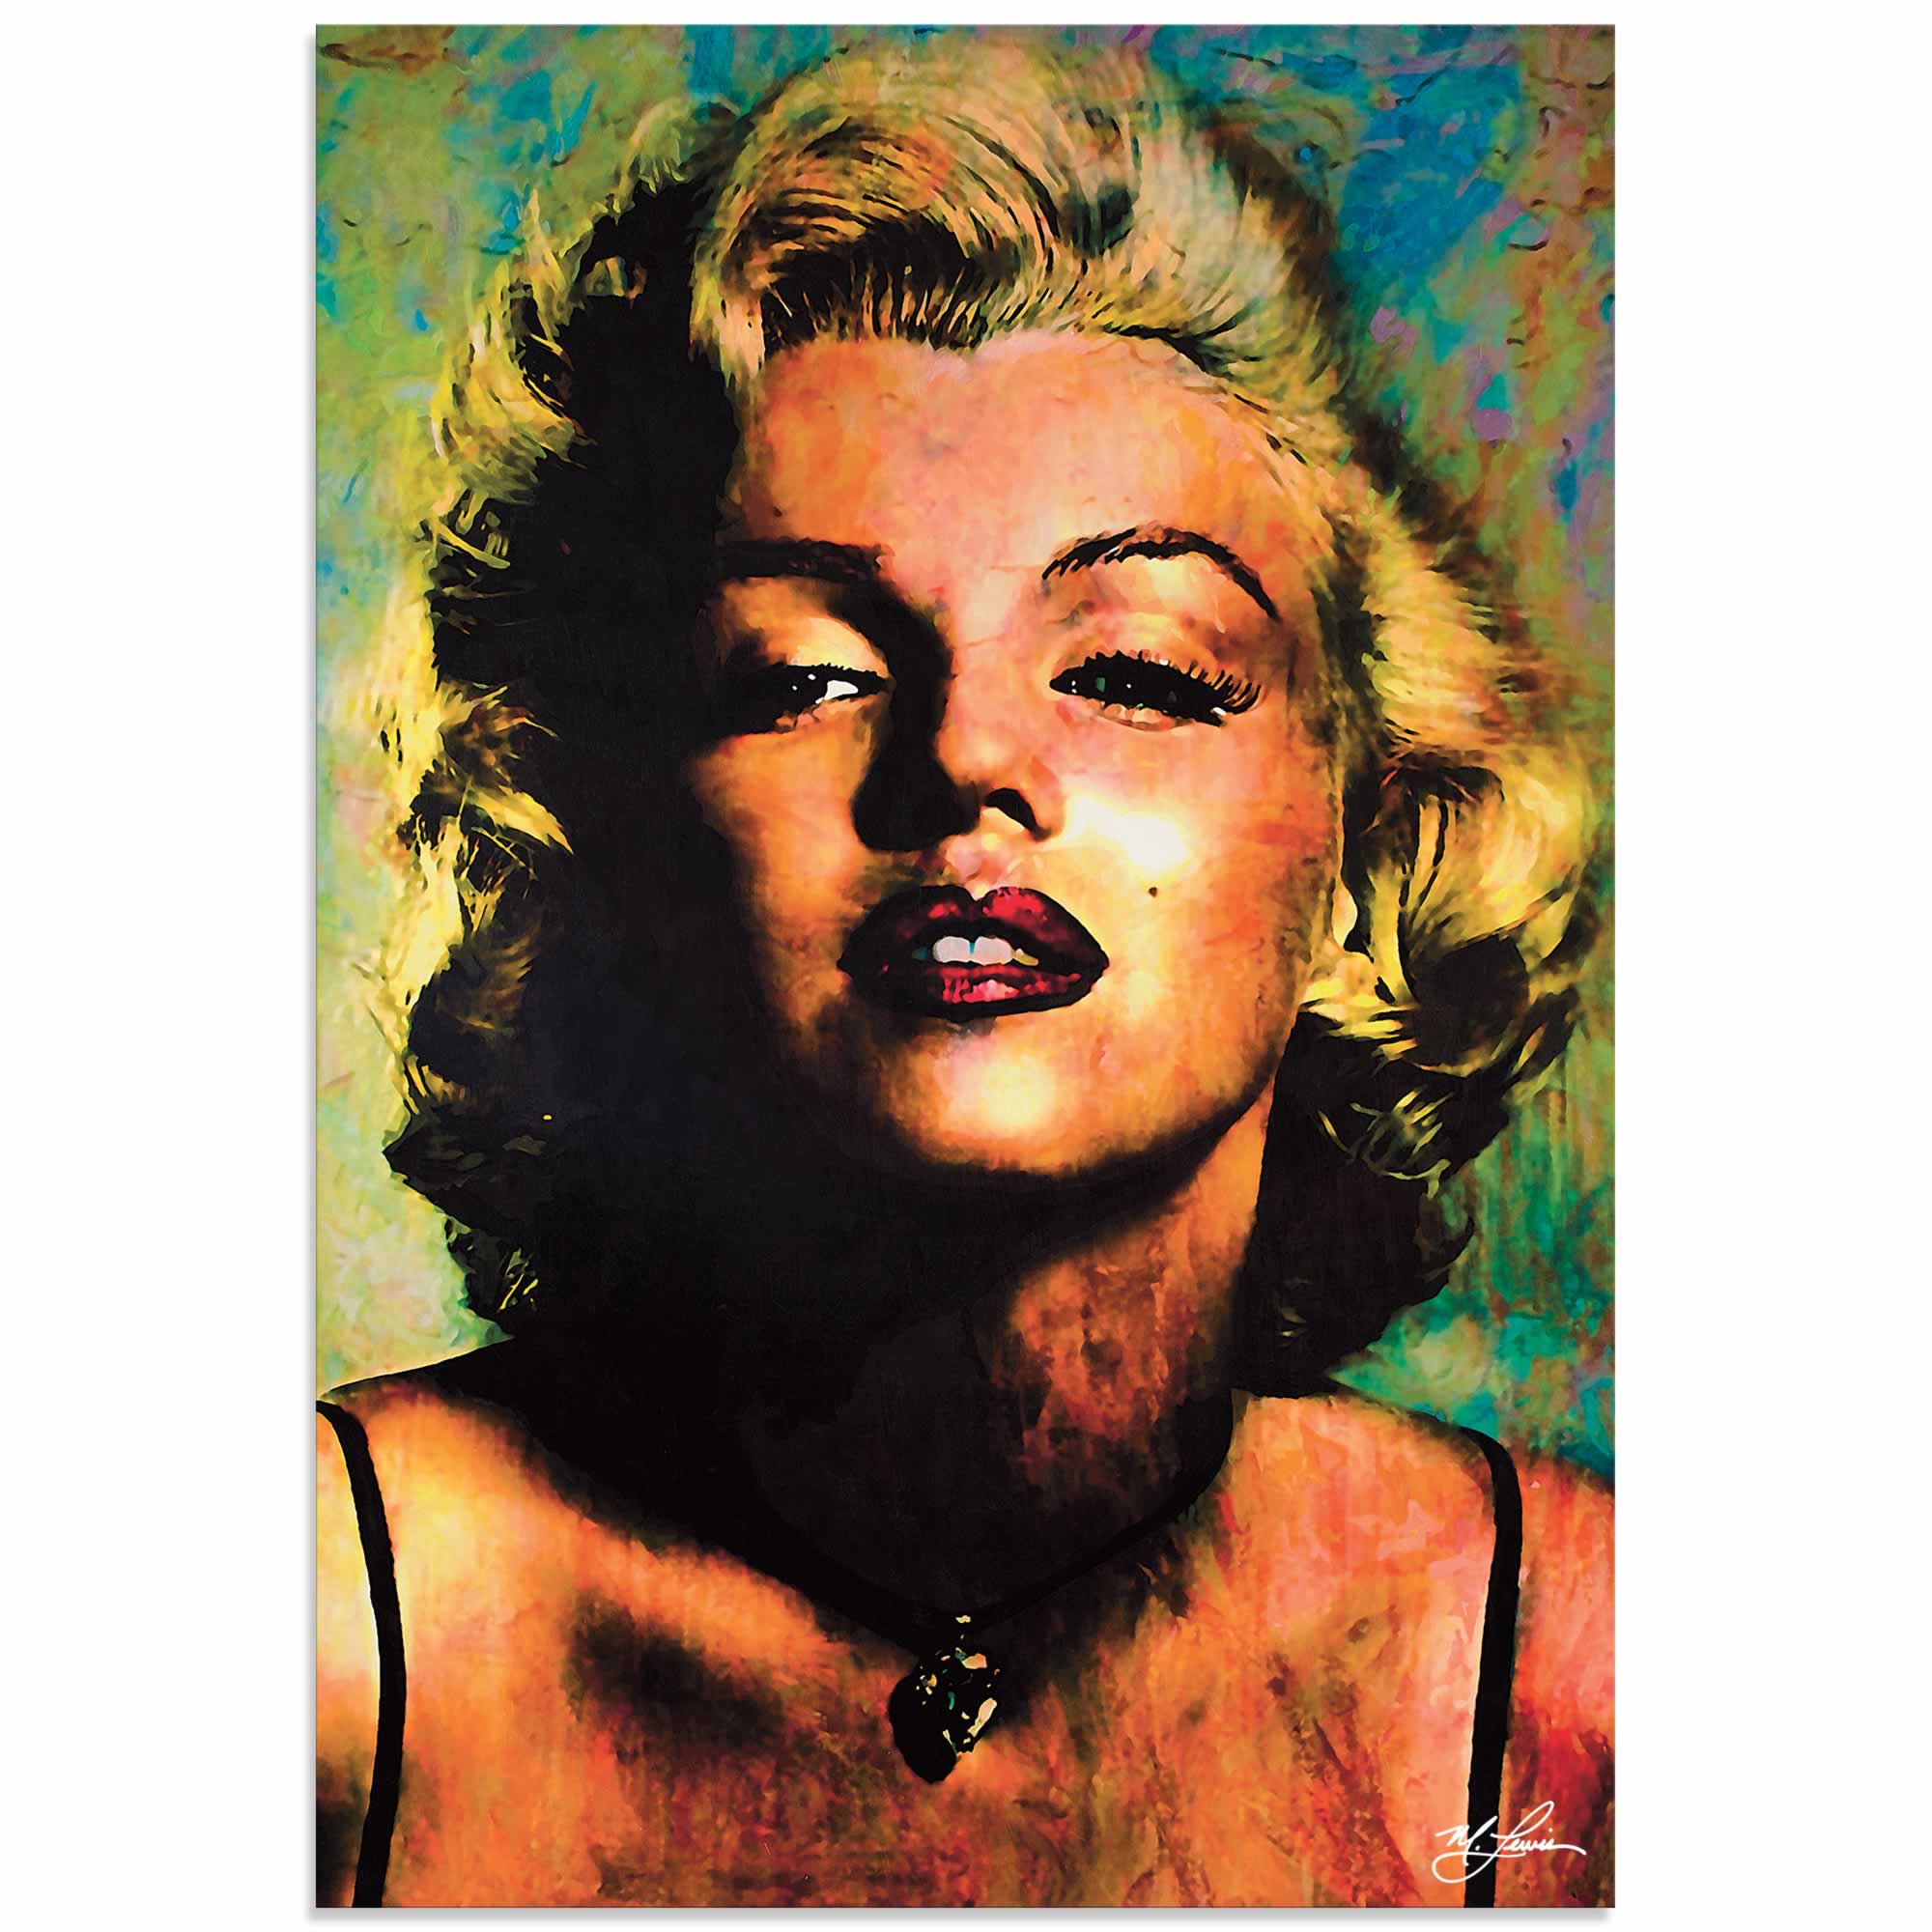 Marilyn Monroe Insatiable | Pop Art Painting by Mark Lewis, Signed & Numbered Limited Edition 